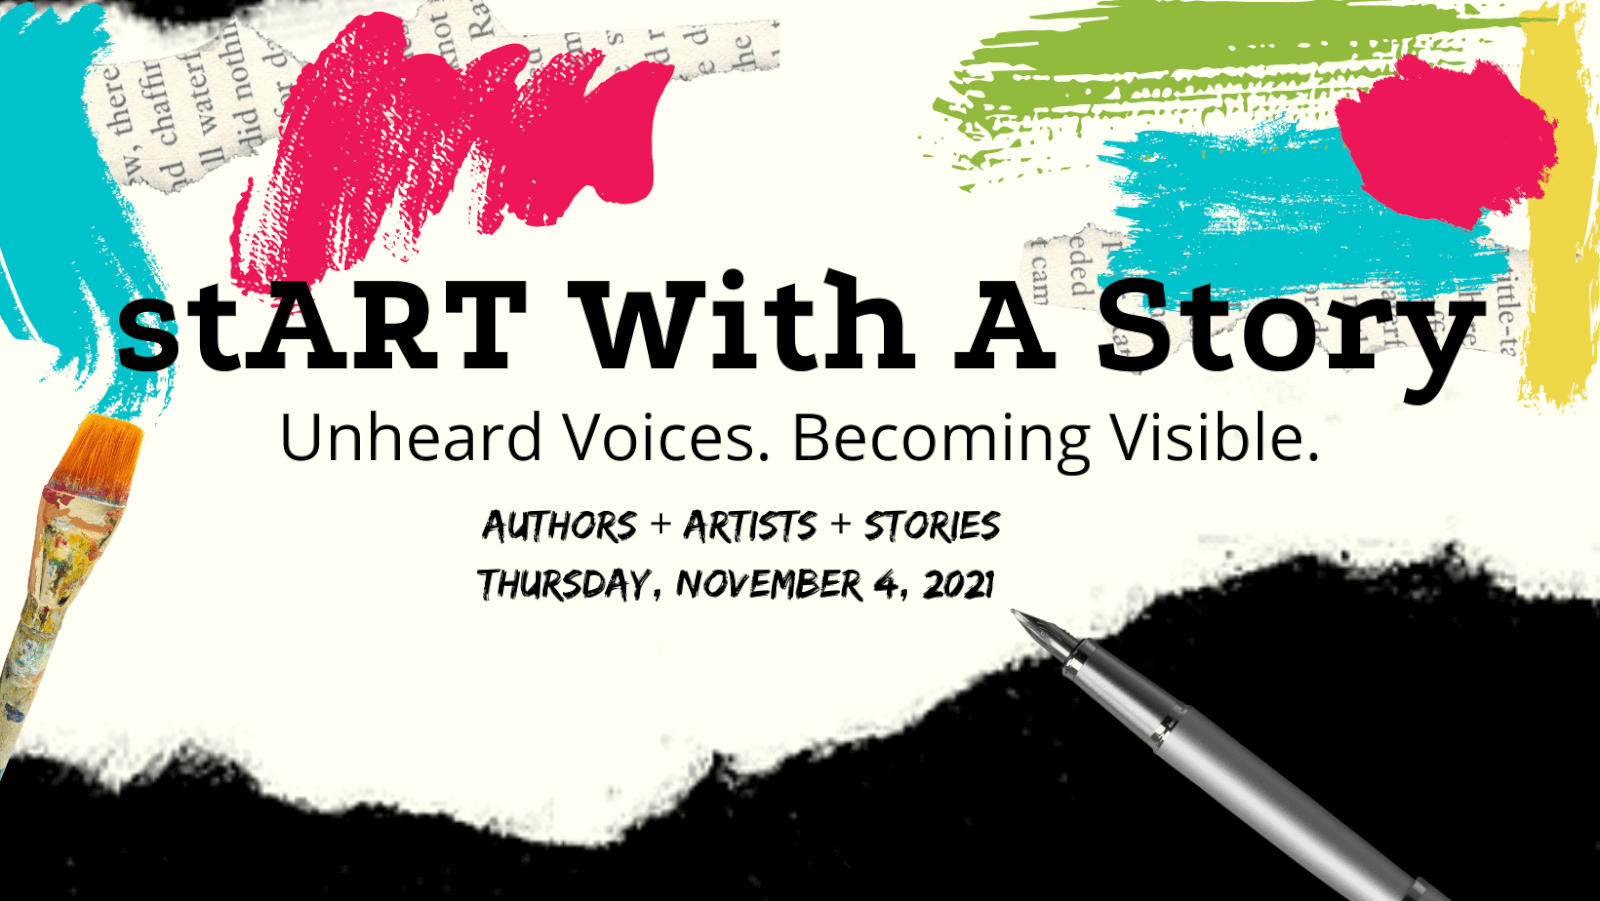 stART with a Story: Unheard Voices. Becoming Visible.